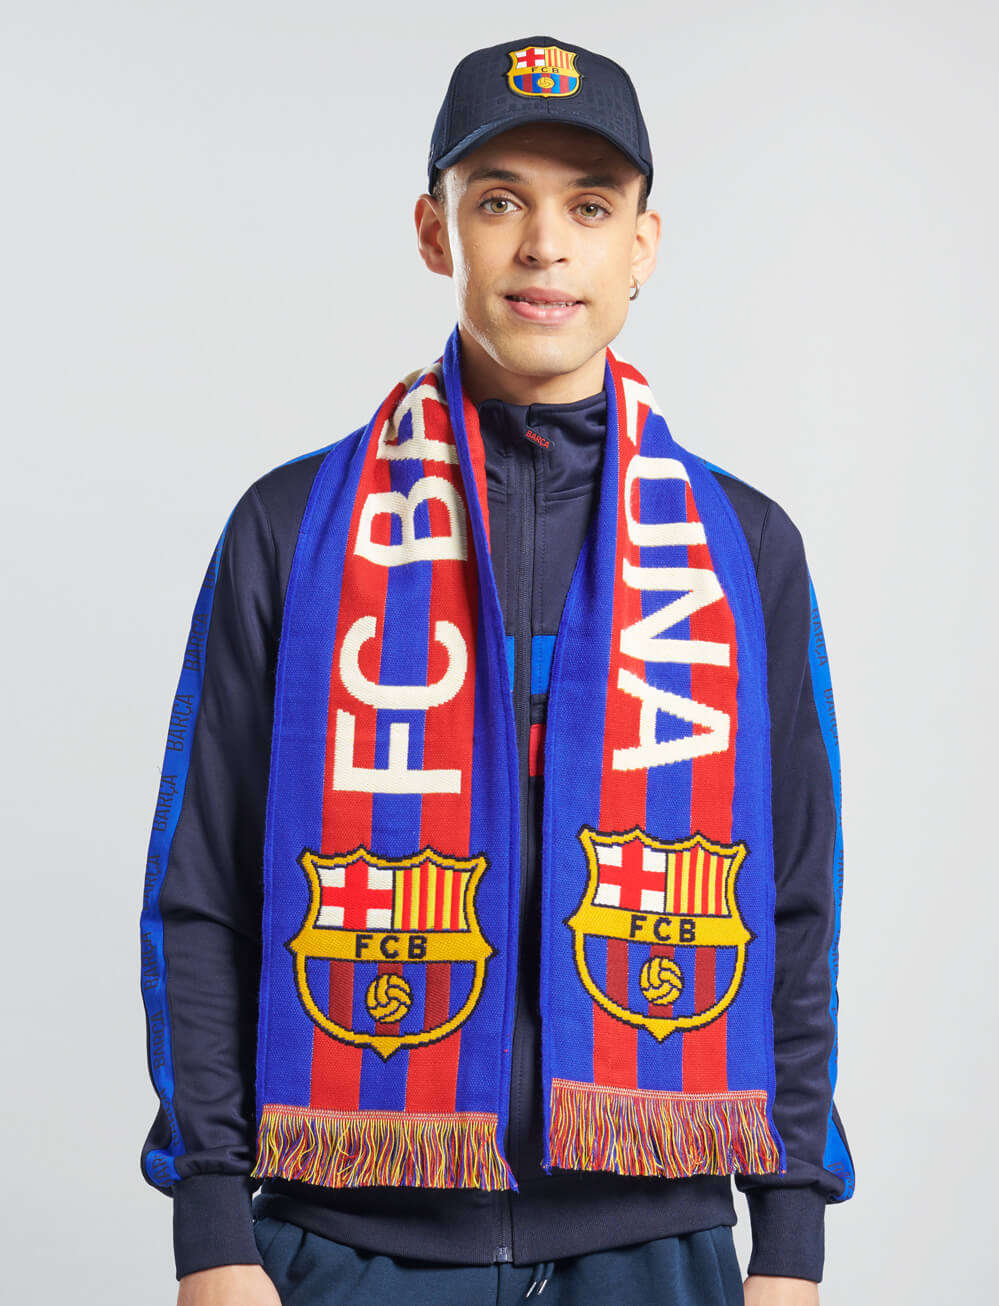 Official FC Barcelona Knitted Scarf - The World Football Store